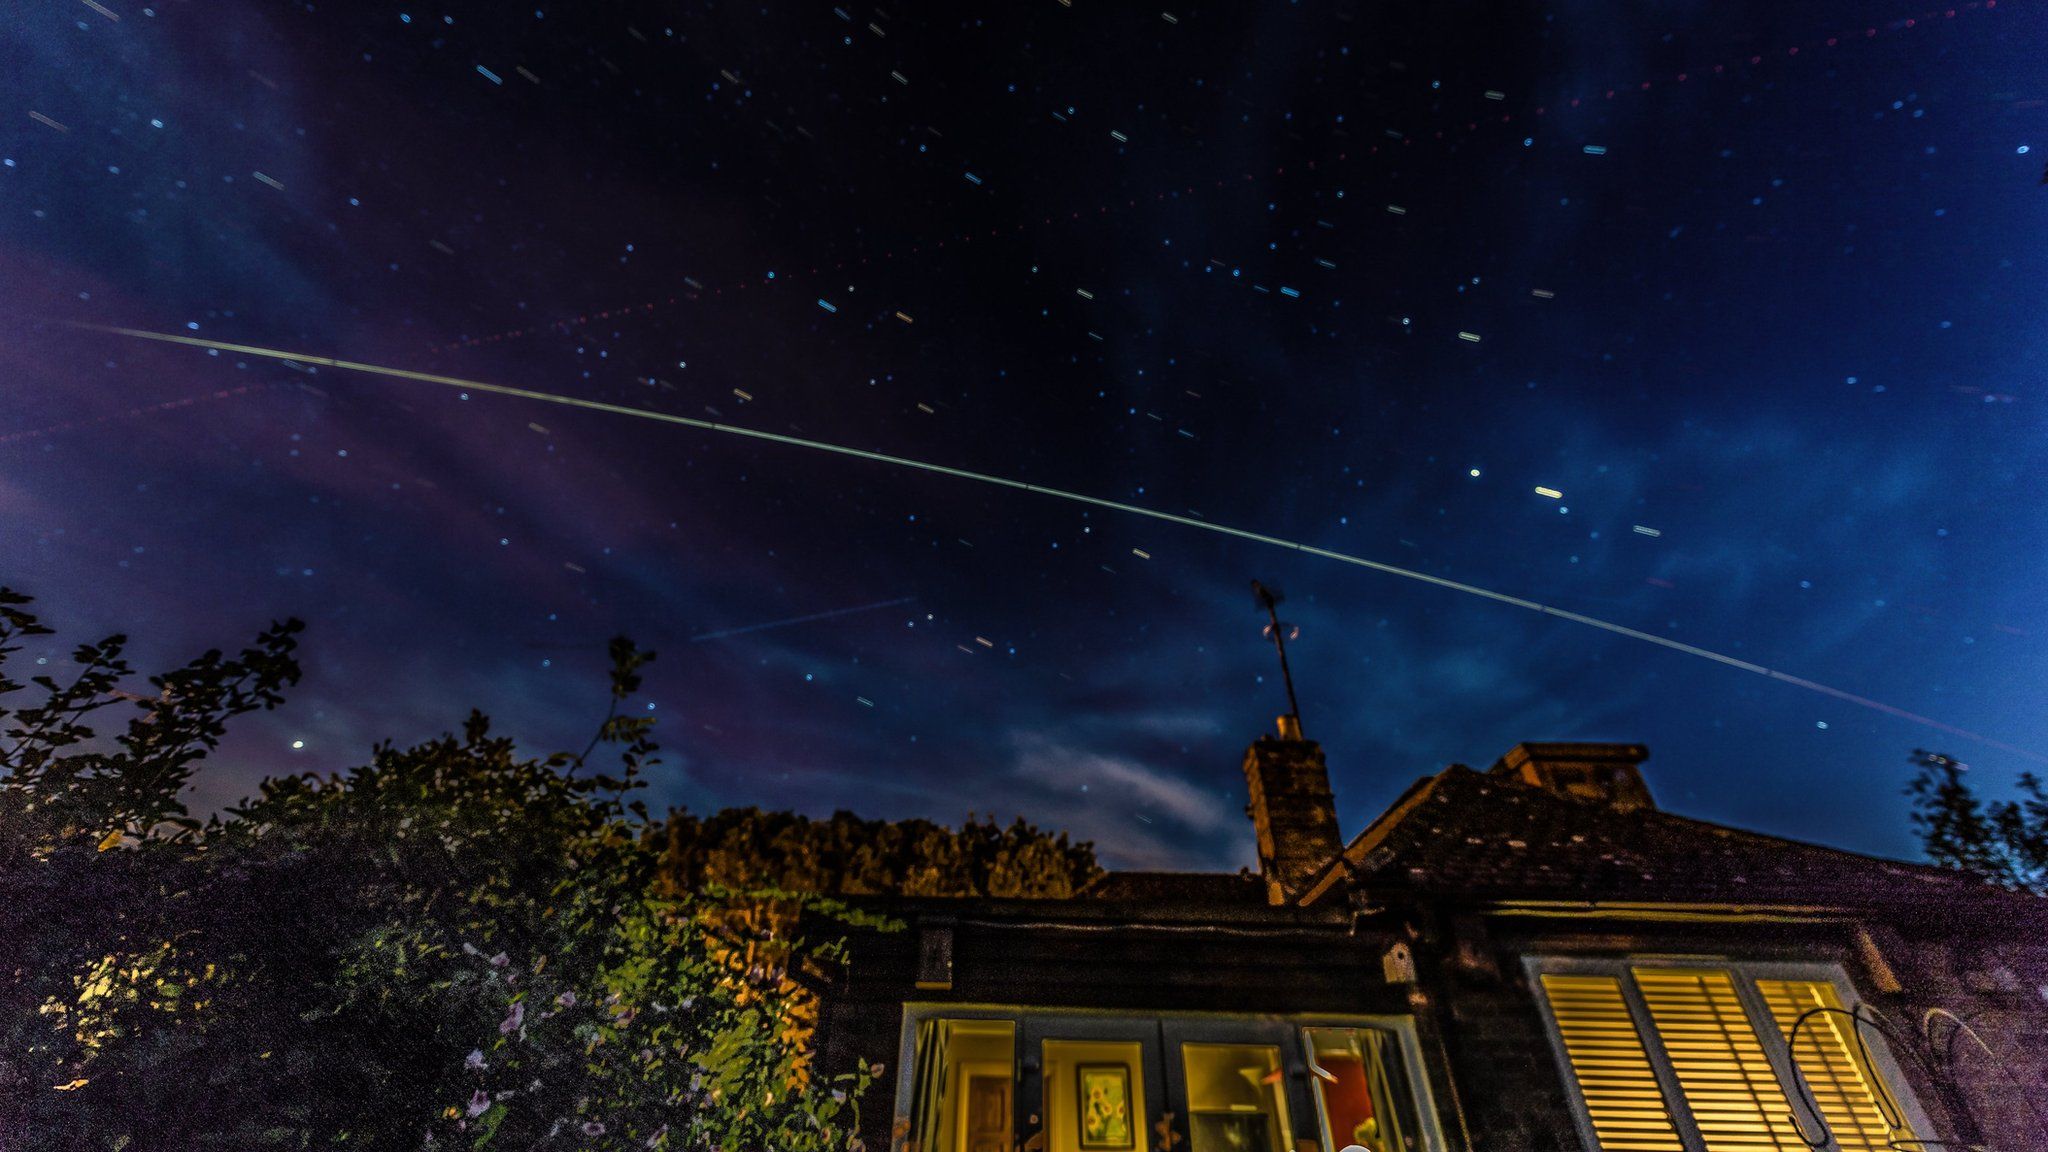 The International Space Station passing over Oxfordshire